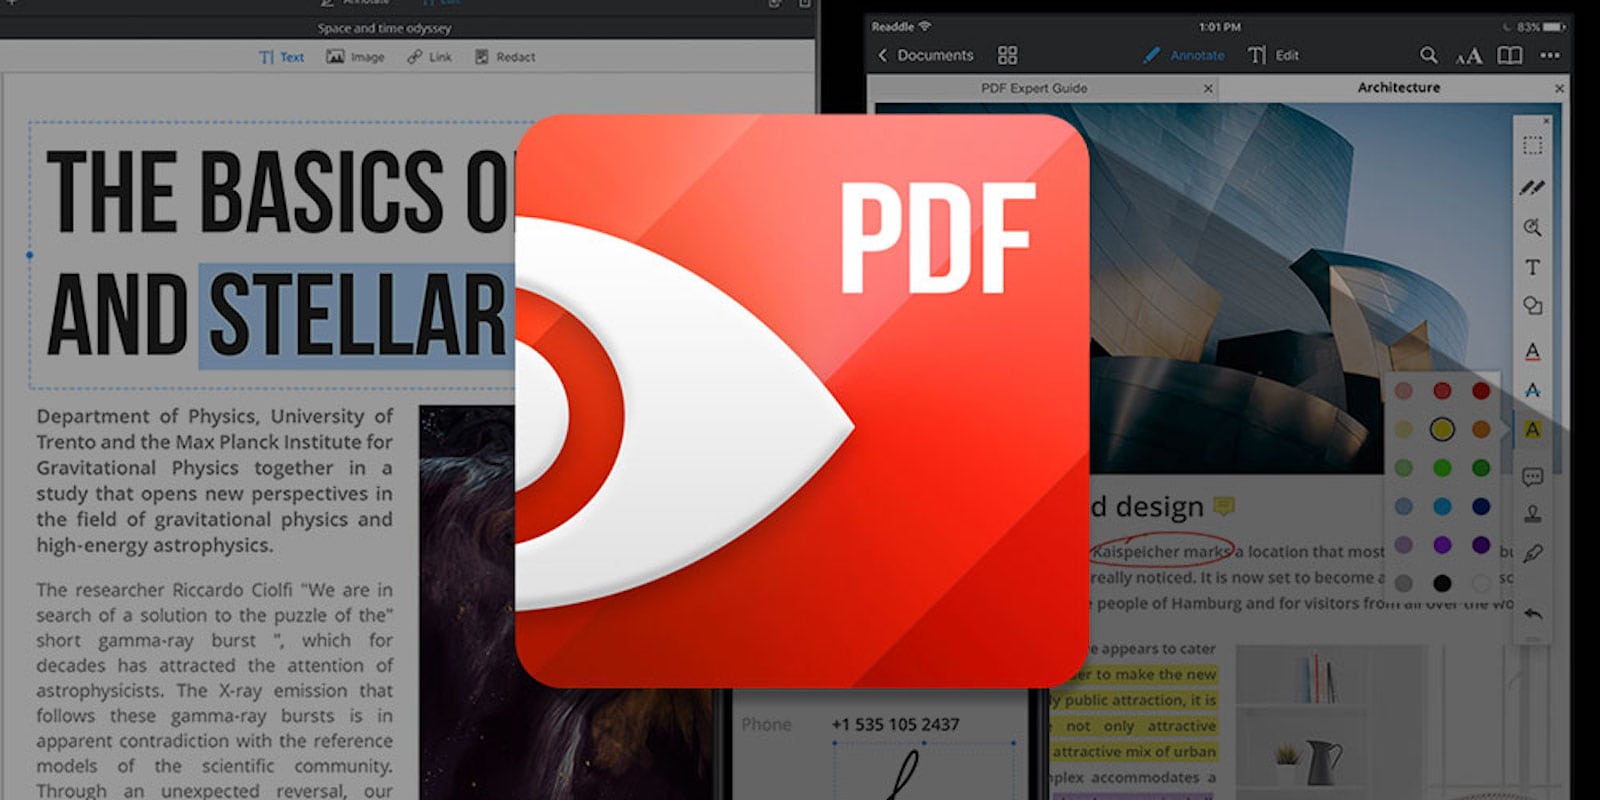 This app makes PDFs as easy to edit as any Word document.